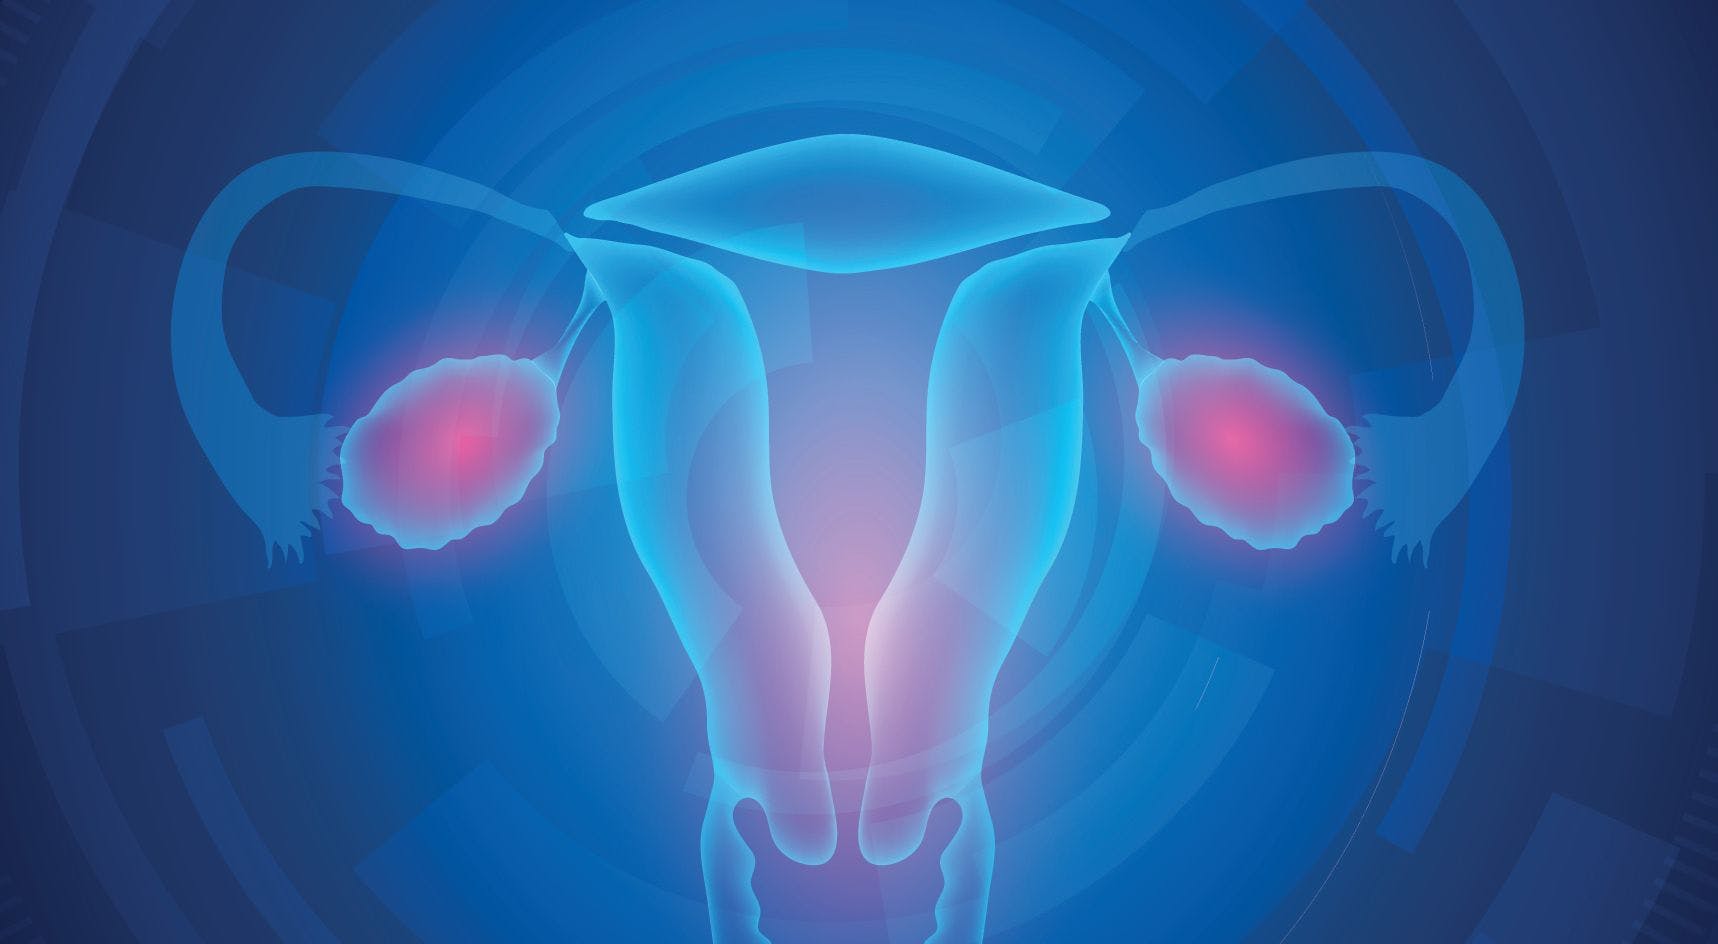 Lynparza Significantly Delays Progression in Advanced Ovarian Cancer, Study Finds